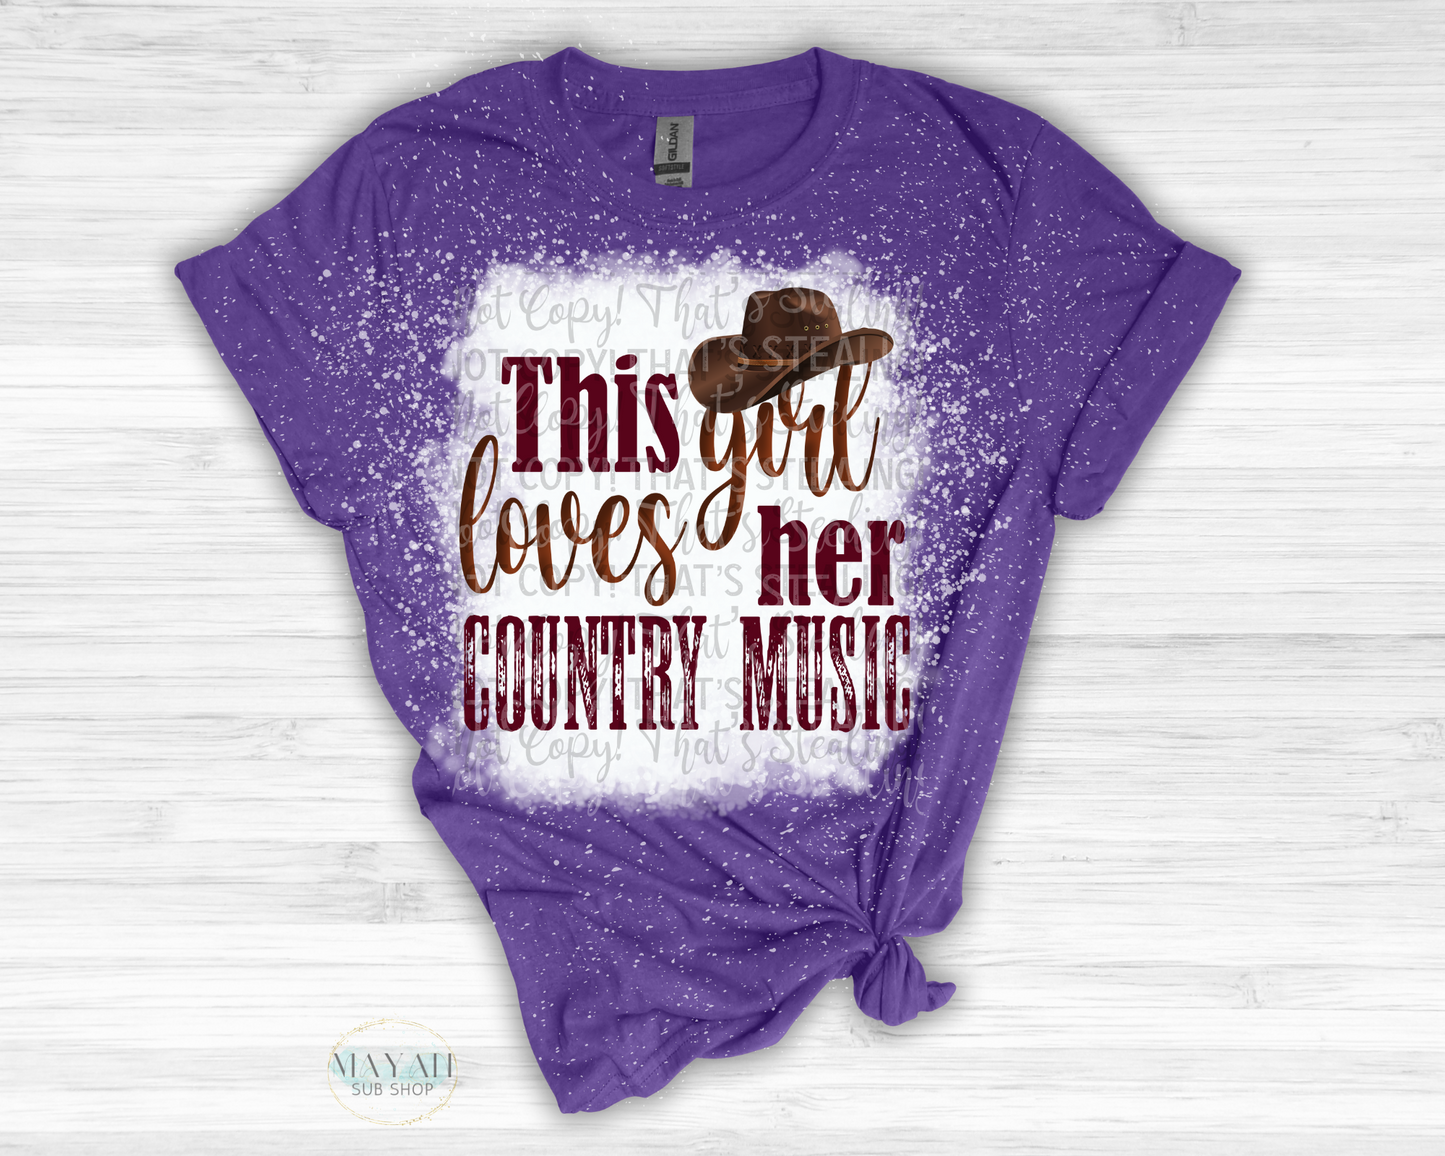 This Girl Loves Her Country Music Bleached Shirt - Mayan Sub Shop